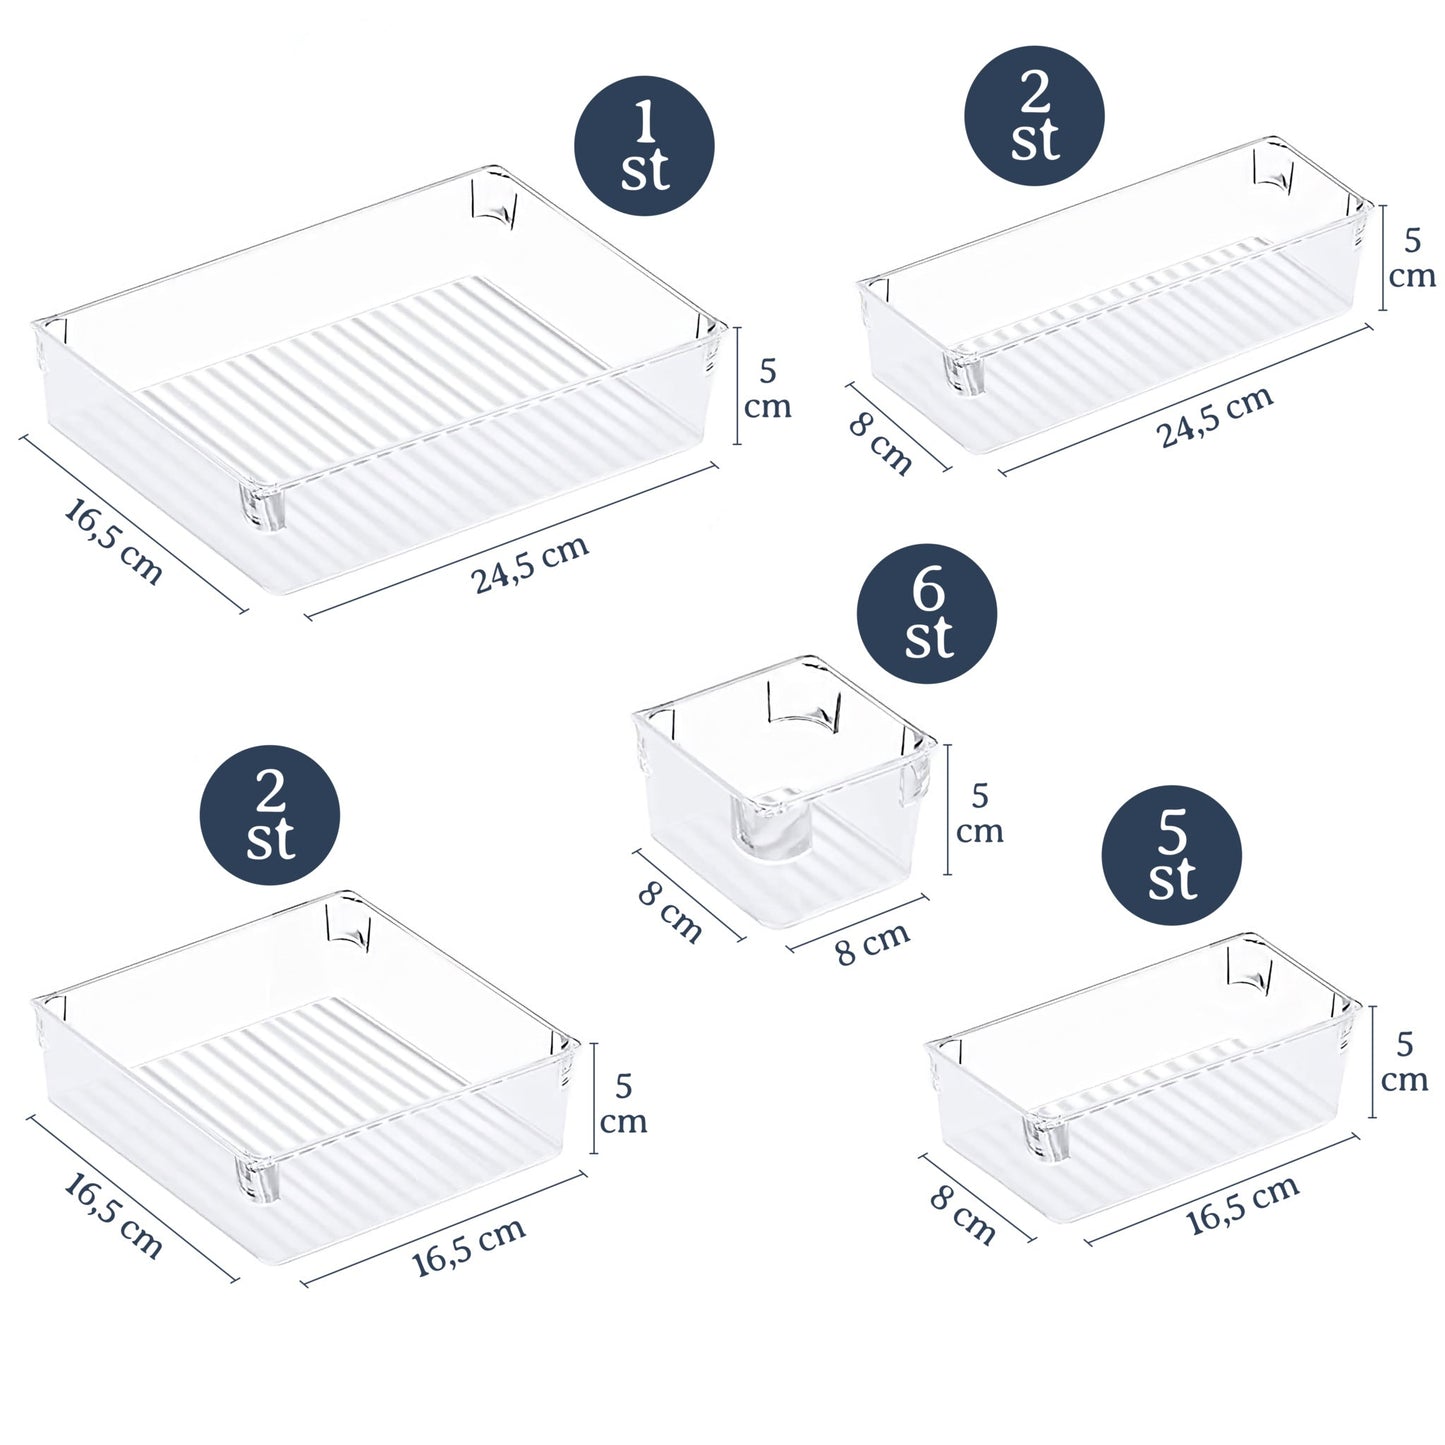 Organise Your Drawers Bundle - Household Drawer Organizer Inserts - The Organisy